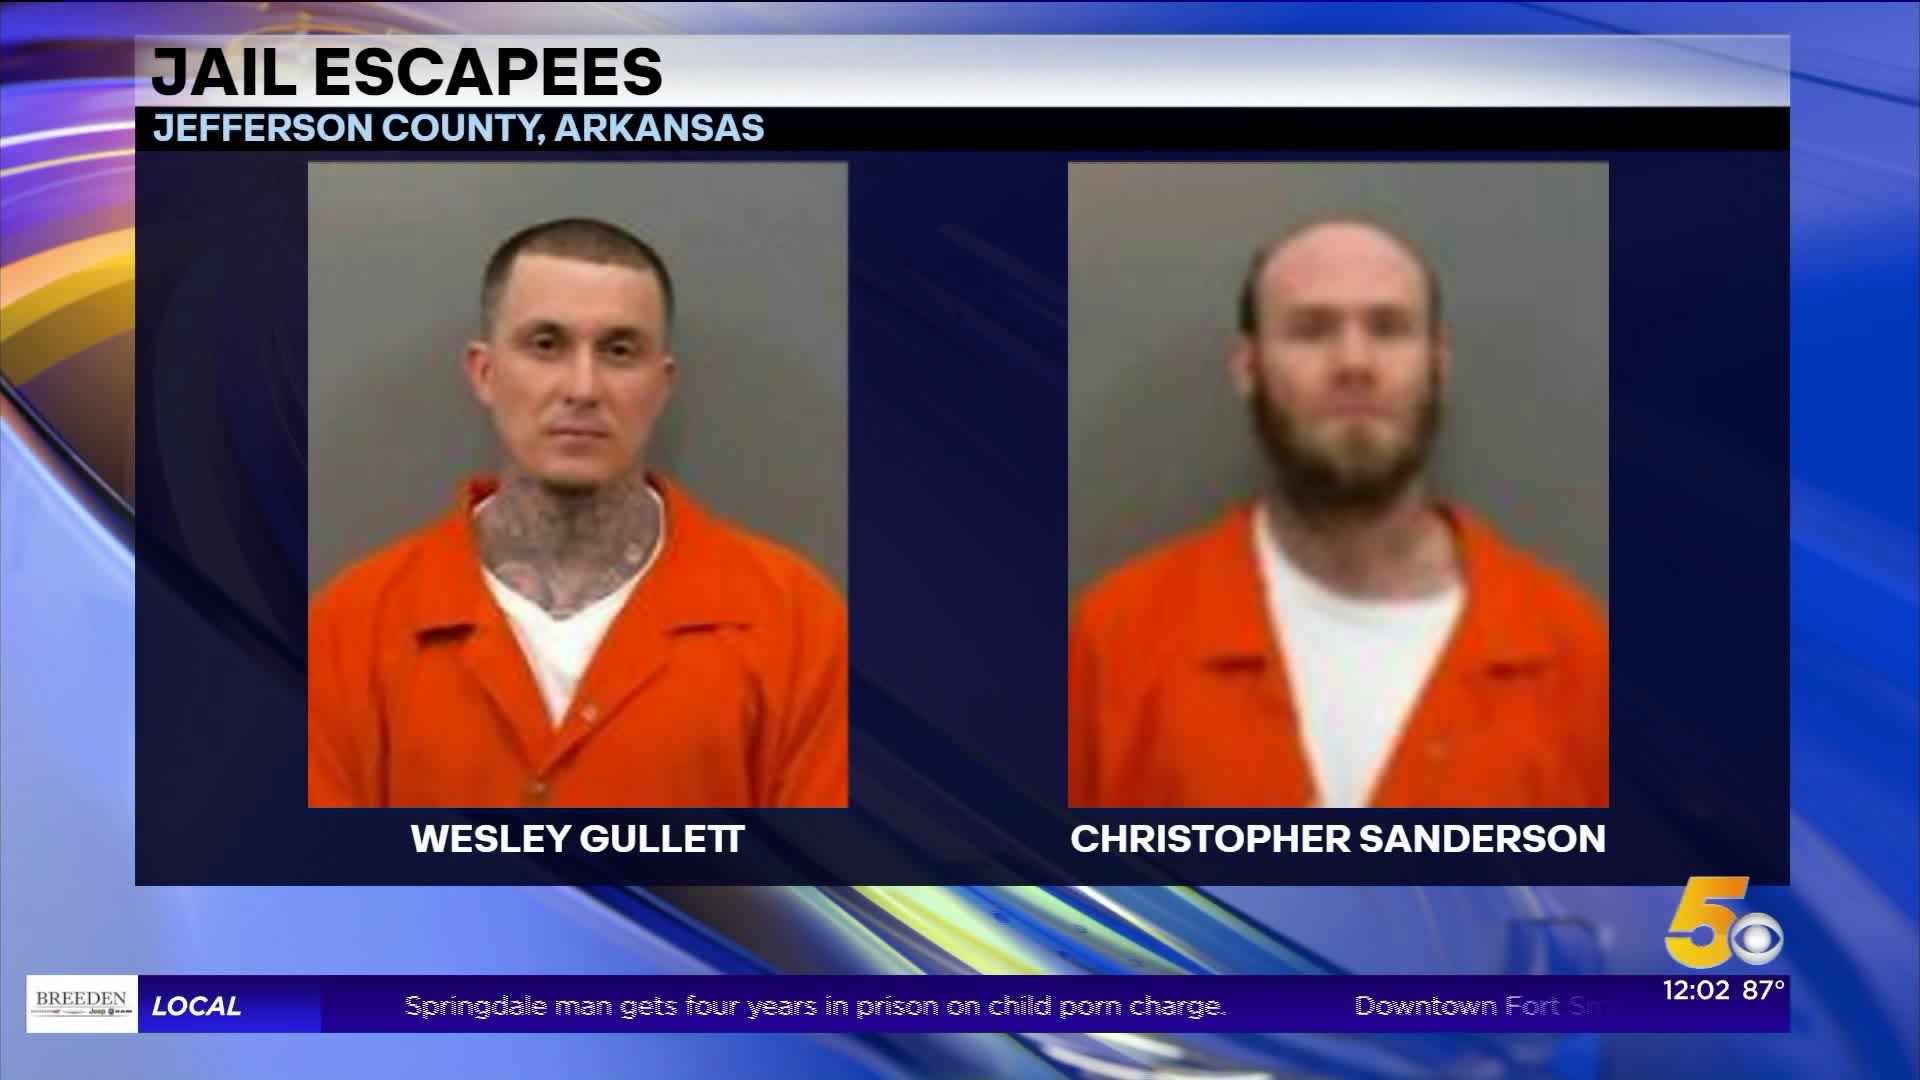 U.S. Marshals Seeking Two Escaped Inmates From Jefferson County